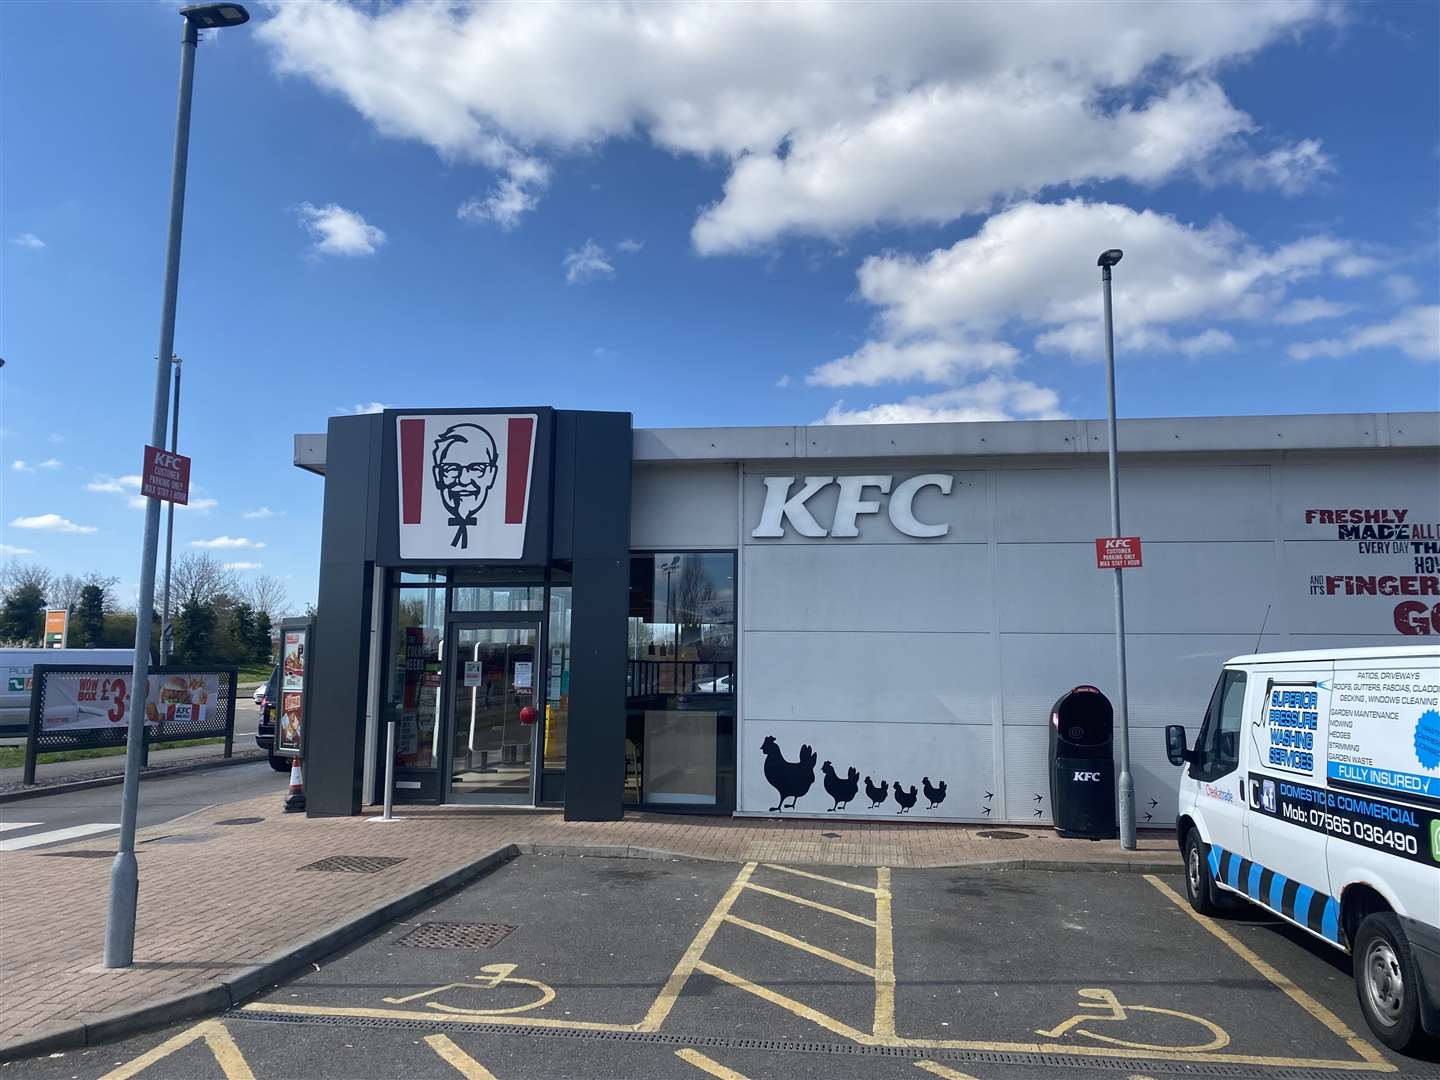 The KFC at Chestfield, near Whitstable, has got quite the reputation